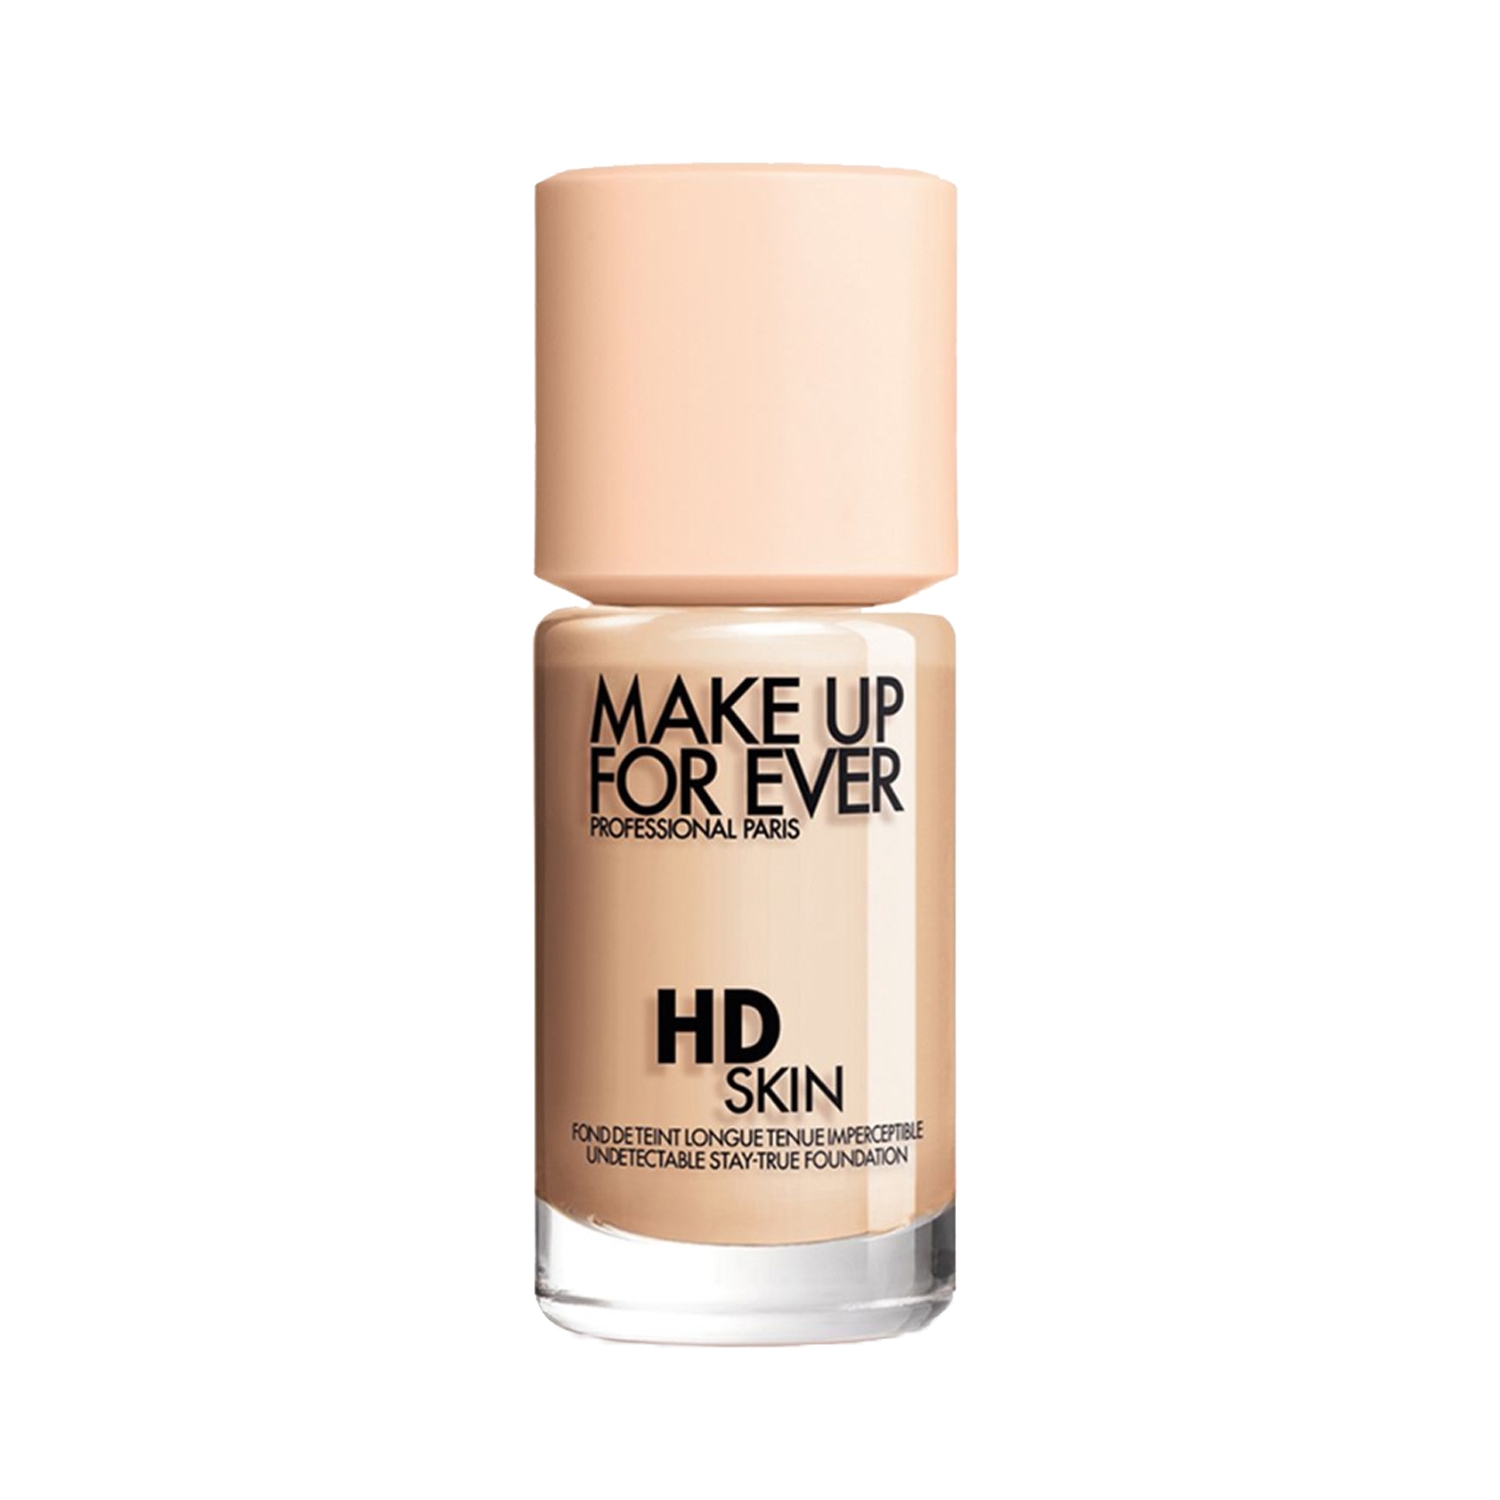 Make Up For Ever | Make Up For Ever Hd Skin Foundation-1N10 (Y235) (30ml)